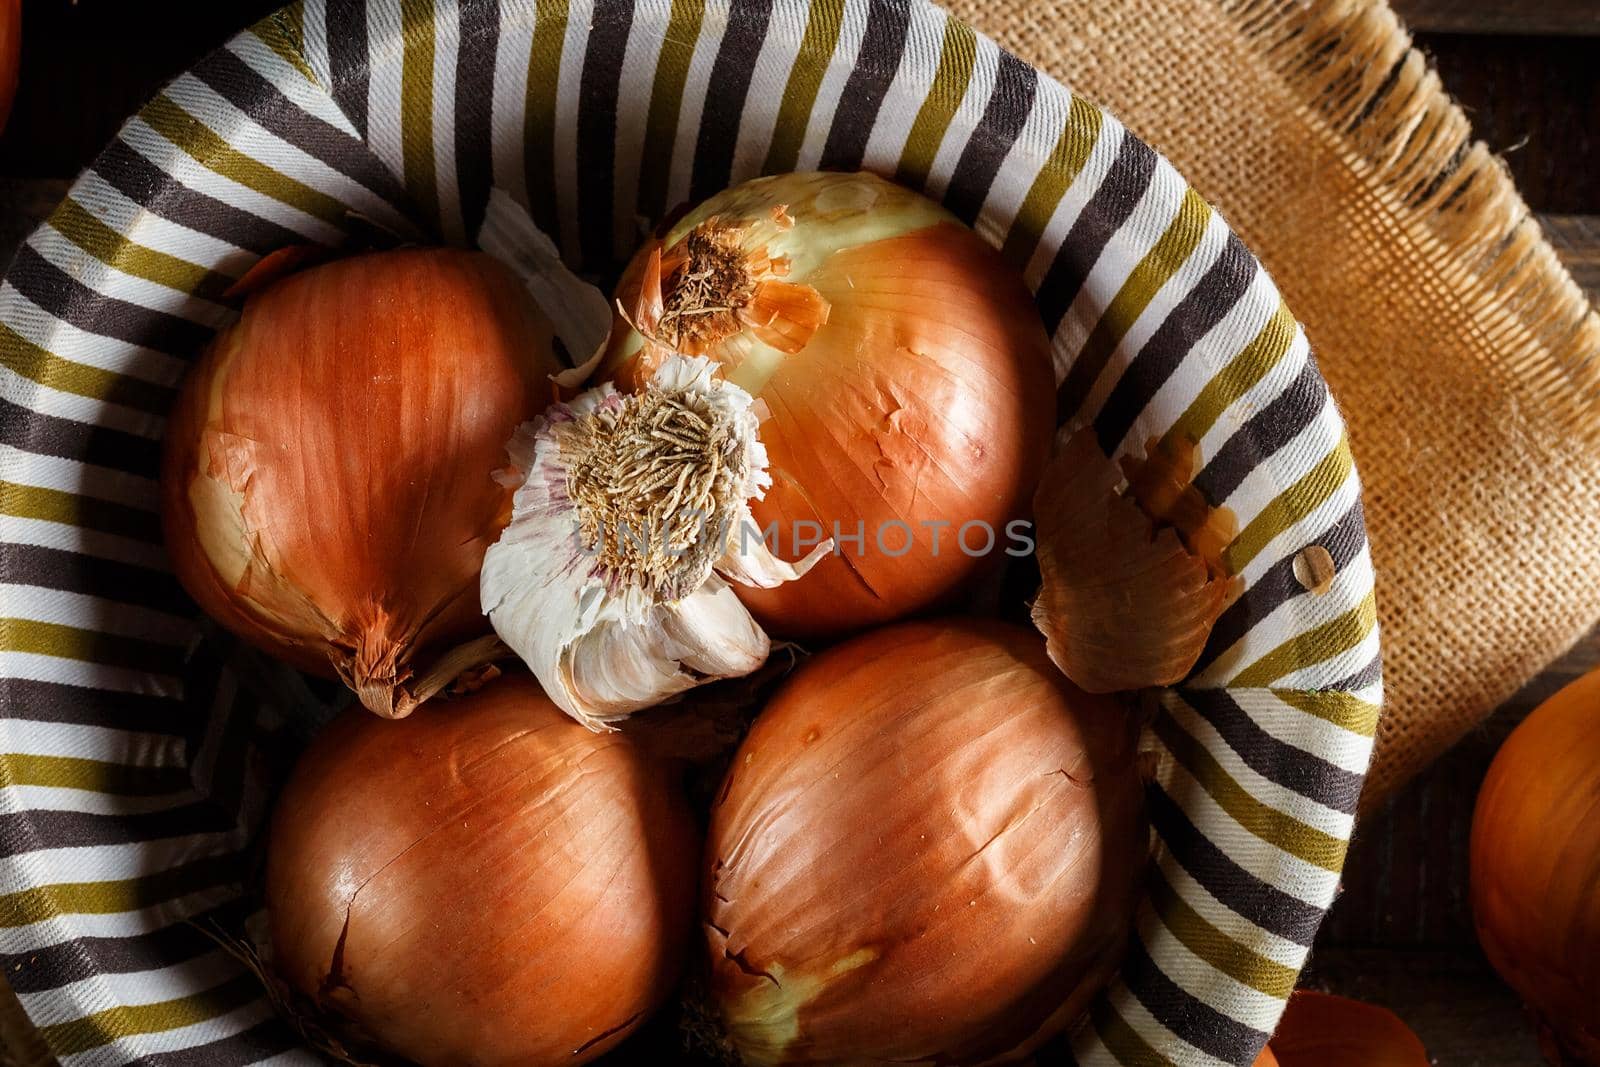 Still life of onions and garlic head in a wicker basket on a sackcloth and wooden boards. Seen from above. Rustic style. Horizontal image.